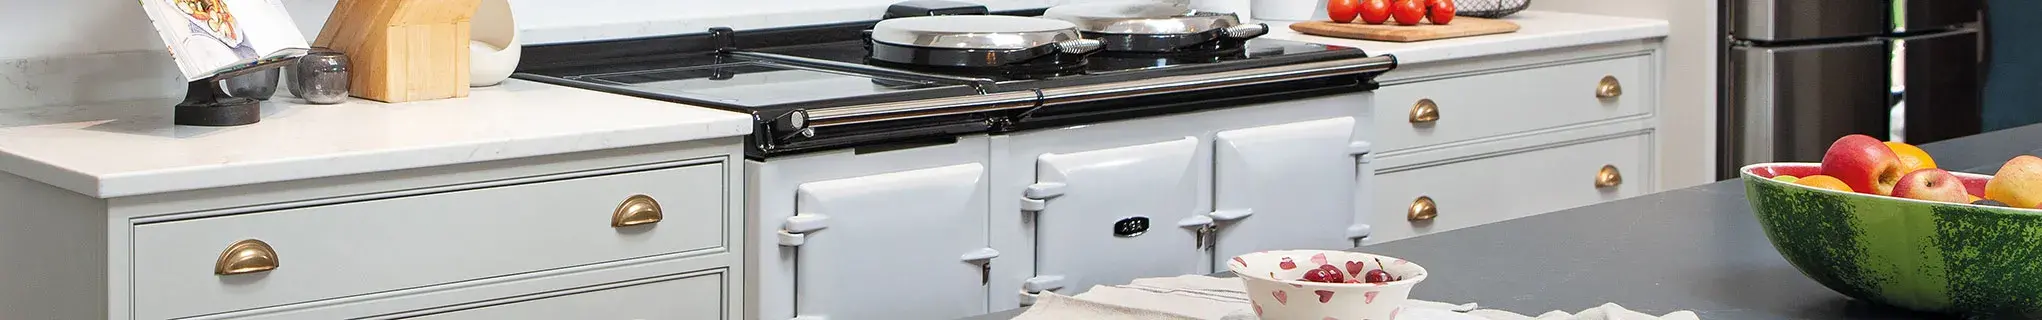 AGa7 Series 150 in Pearl Ashes